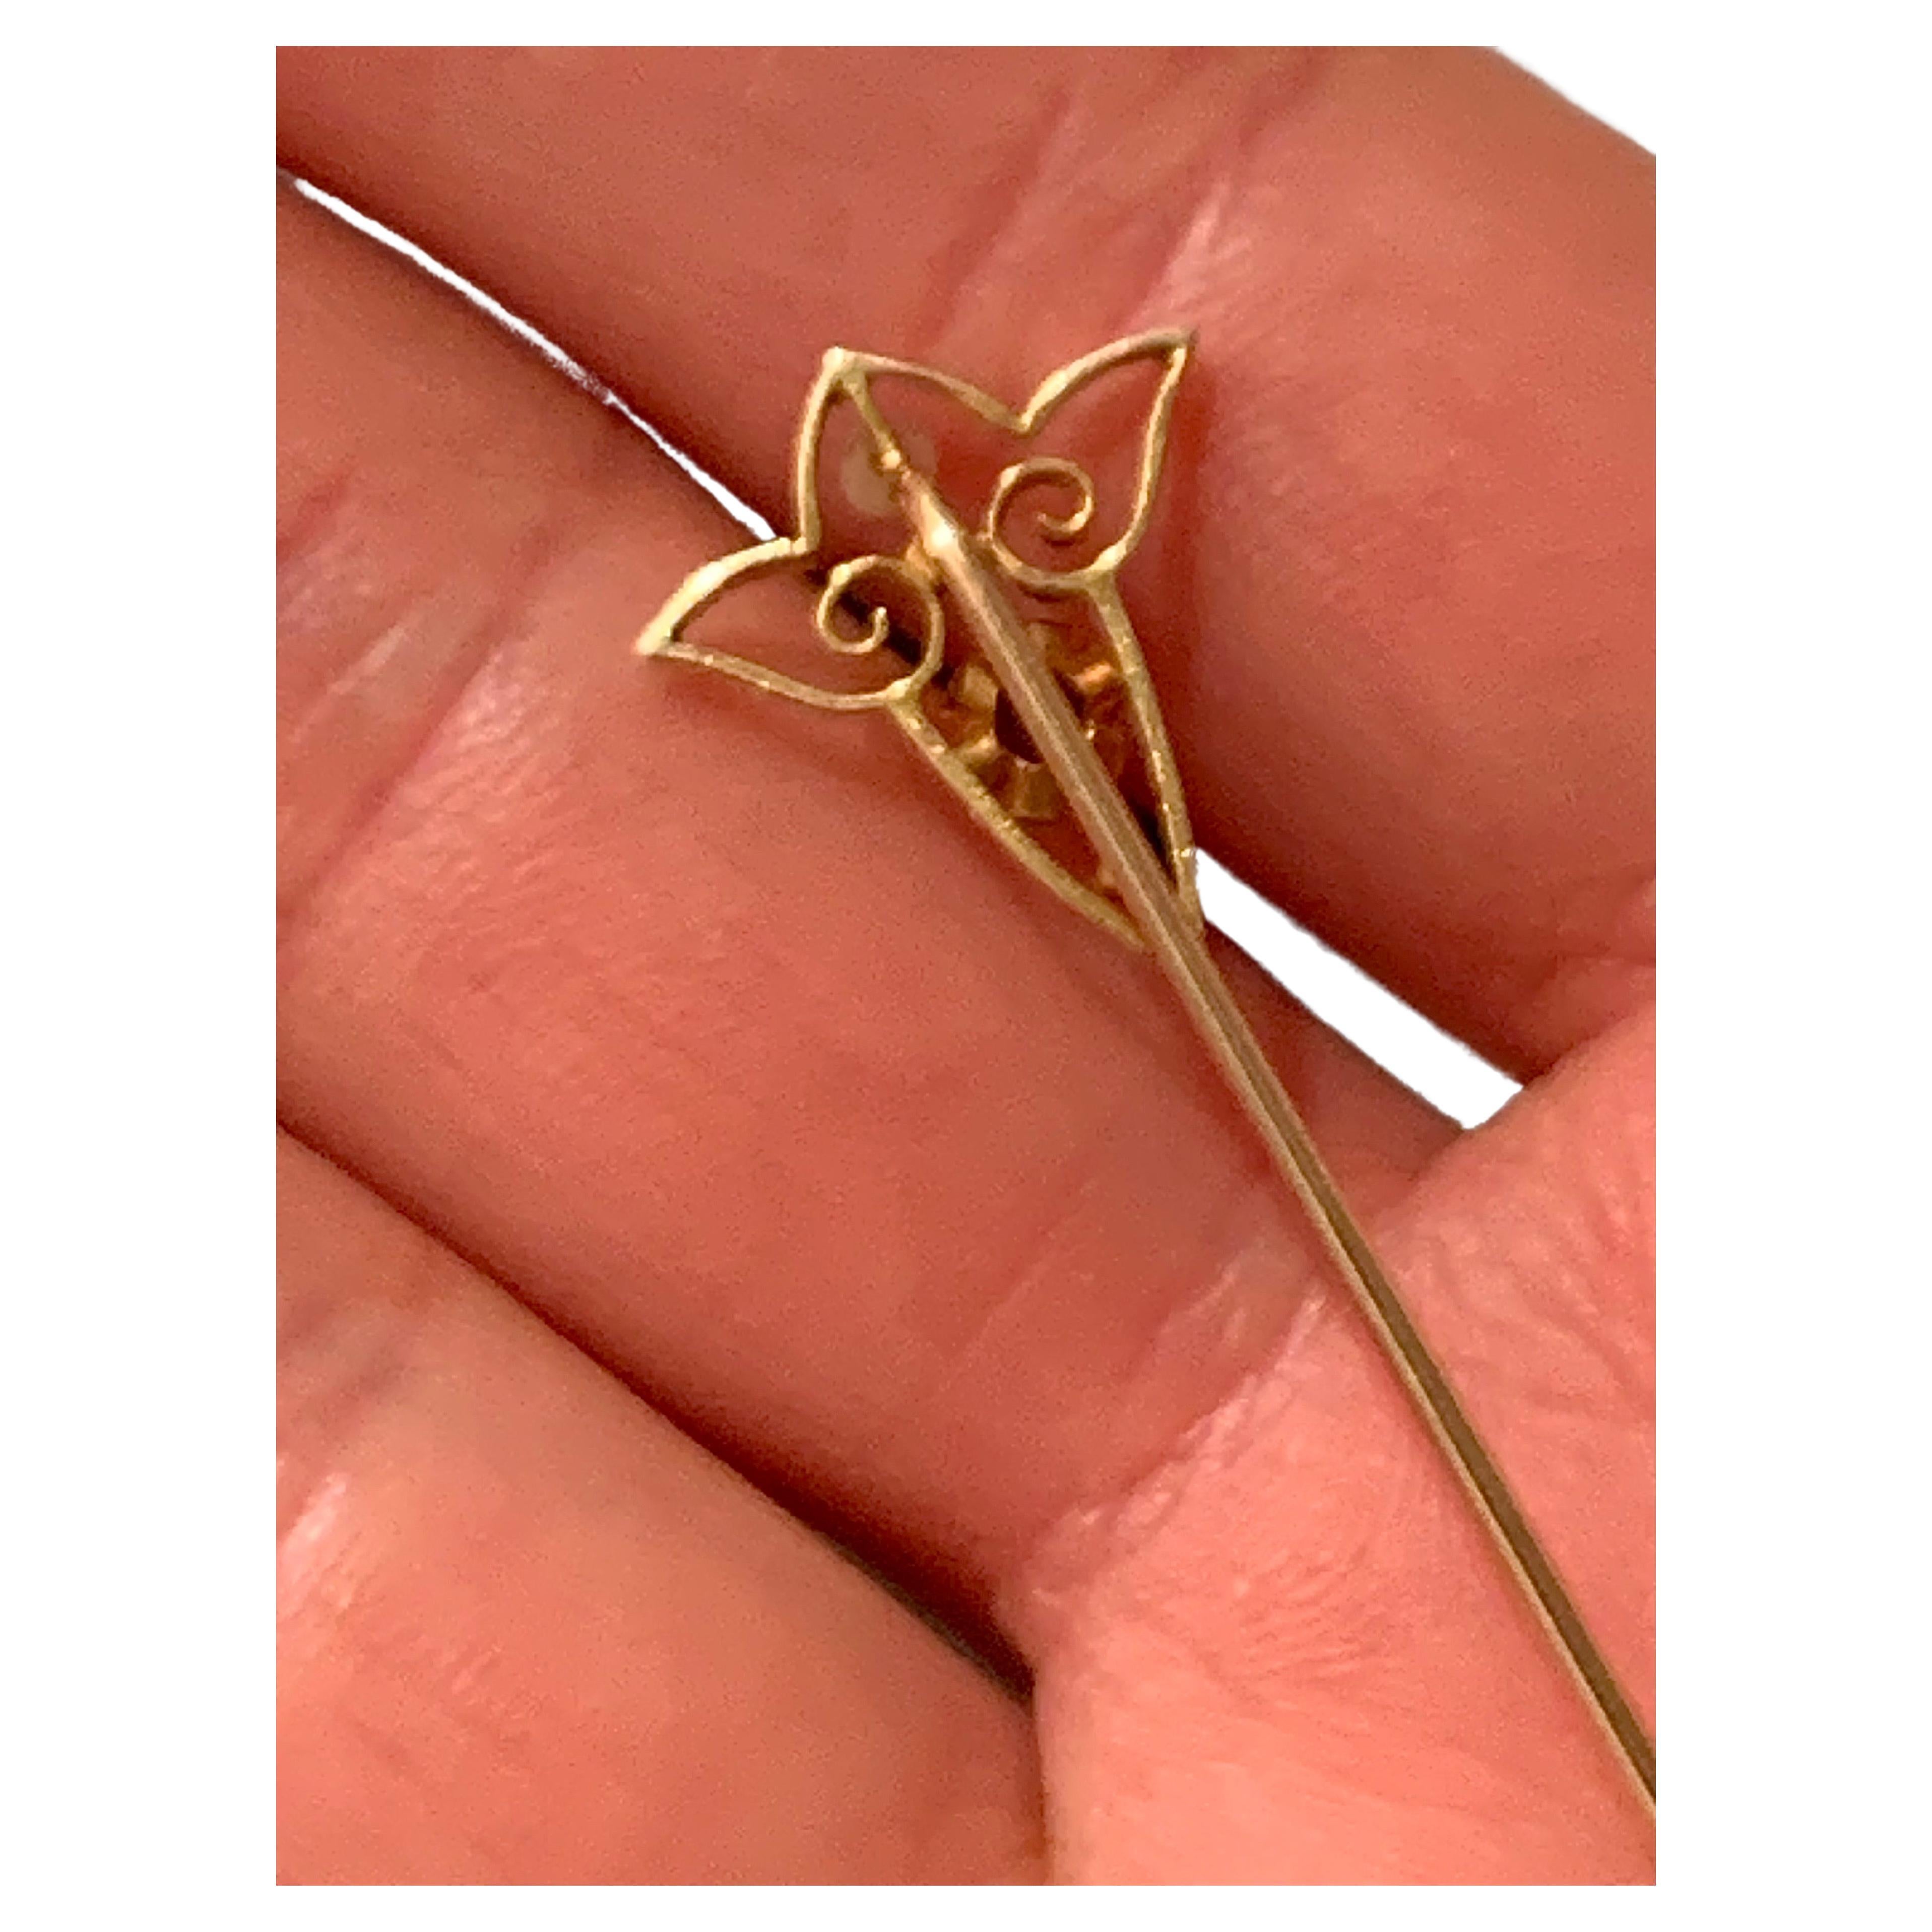 This elegant Art Nouveau tie pin has been handcrafted out of 14 karat yellow gold. The strong and typical Art Nouveau line has been translated into a creation which uses  a wide gold ribbon to express a powerful Art Nouveau Design. A bright blue